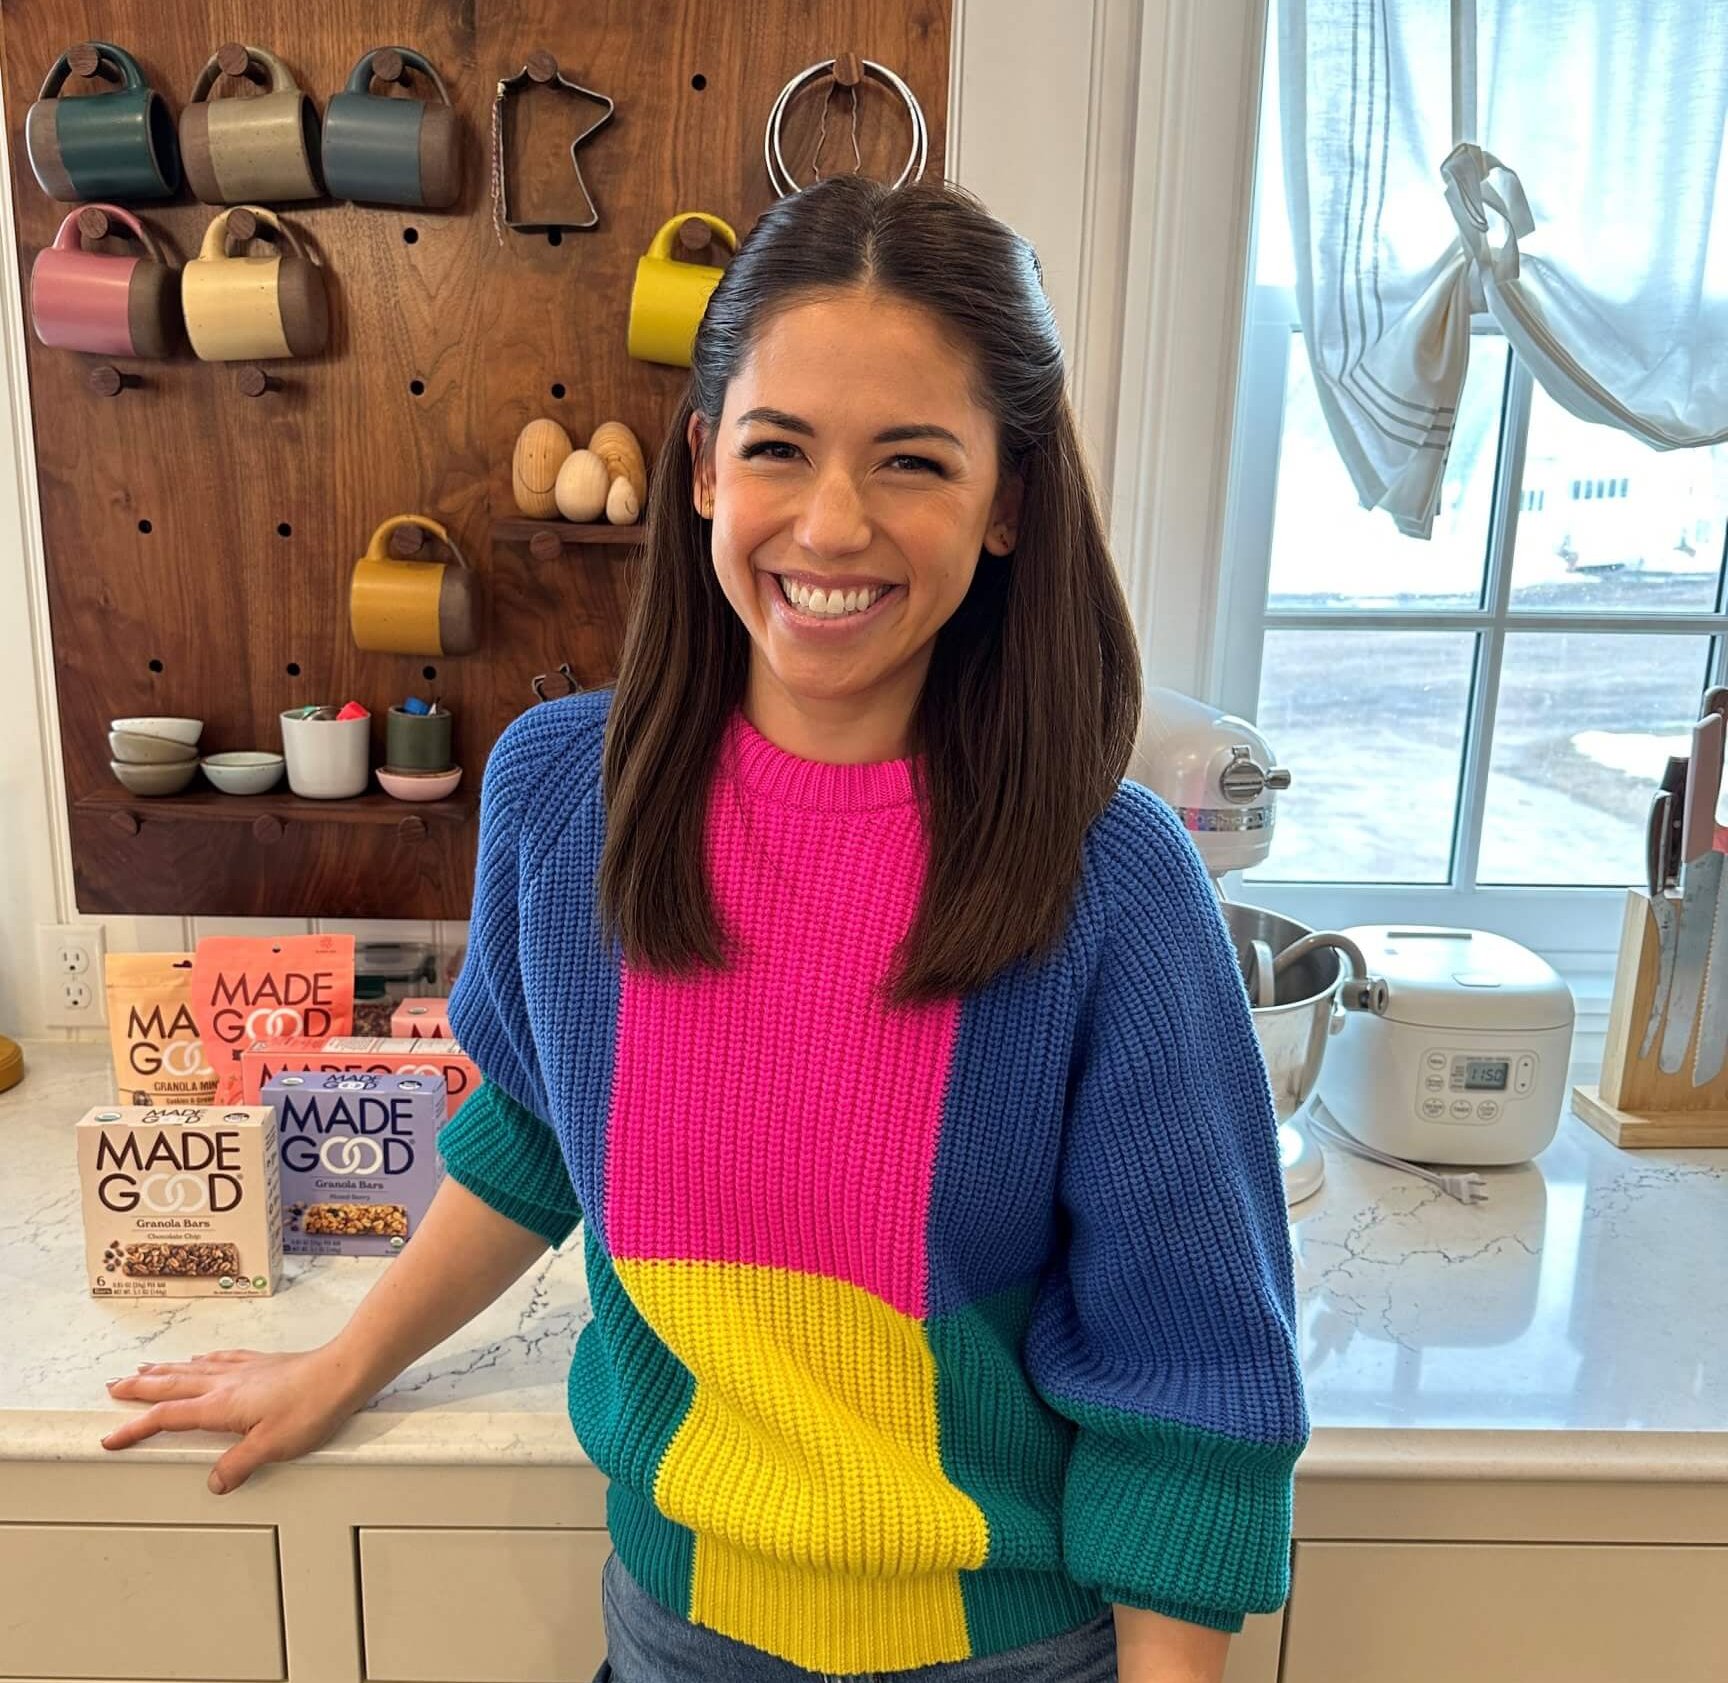 A woman, Molly Yeh, smiles in front of a countertop with a bright sweater on.